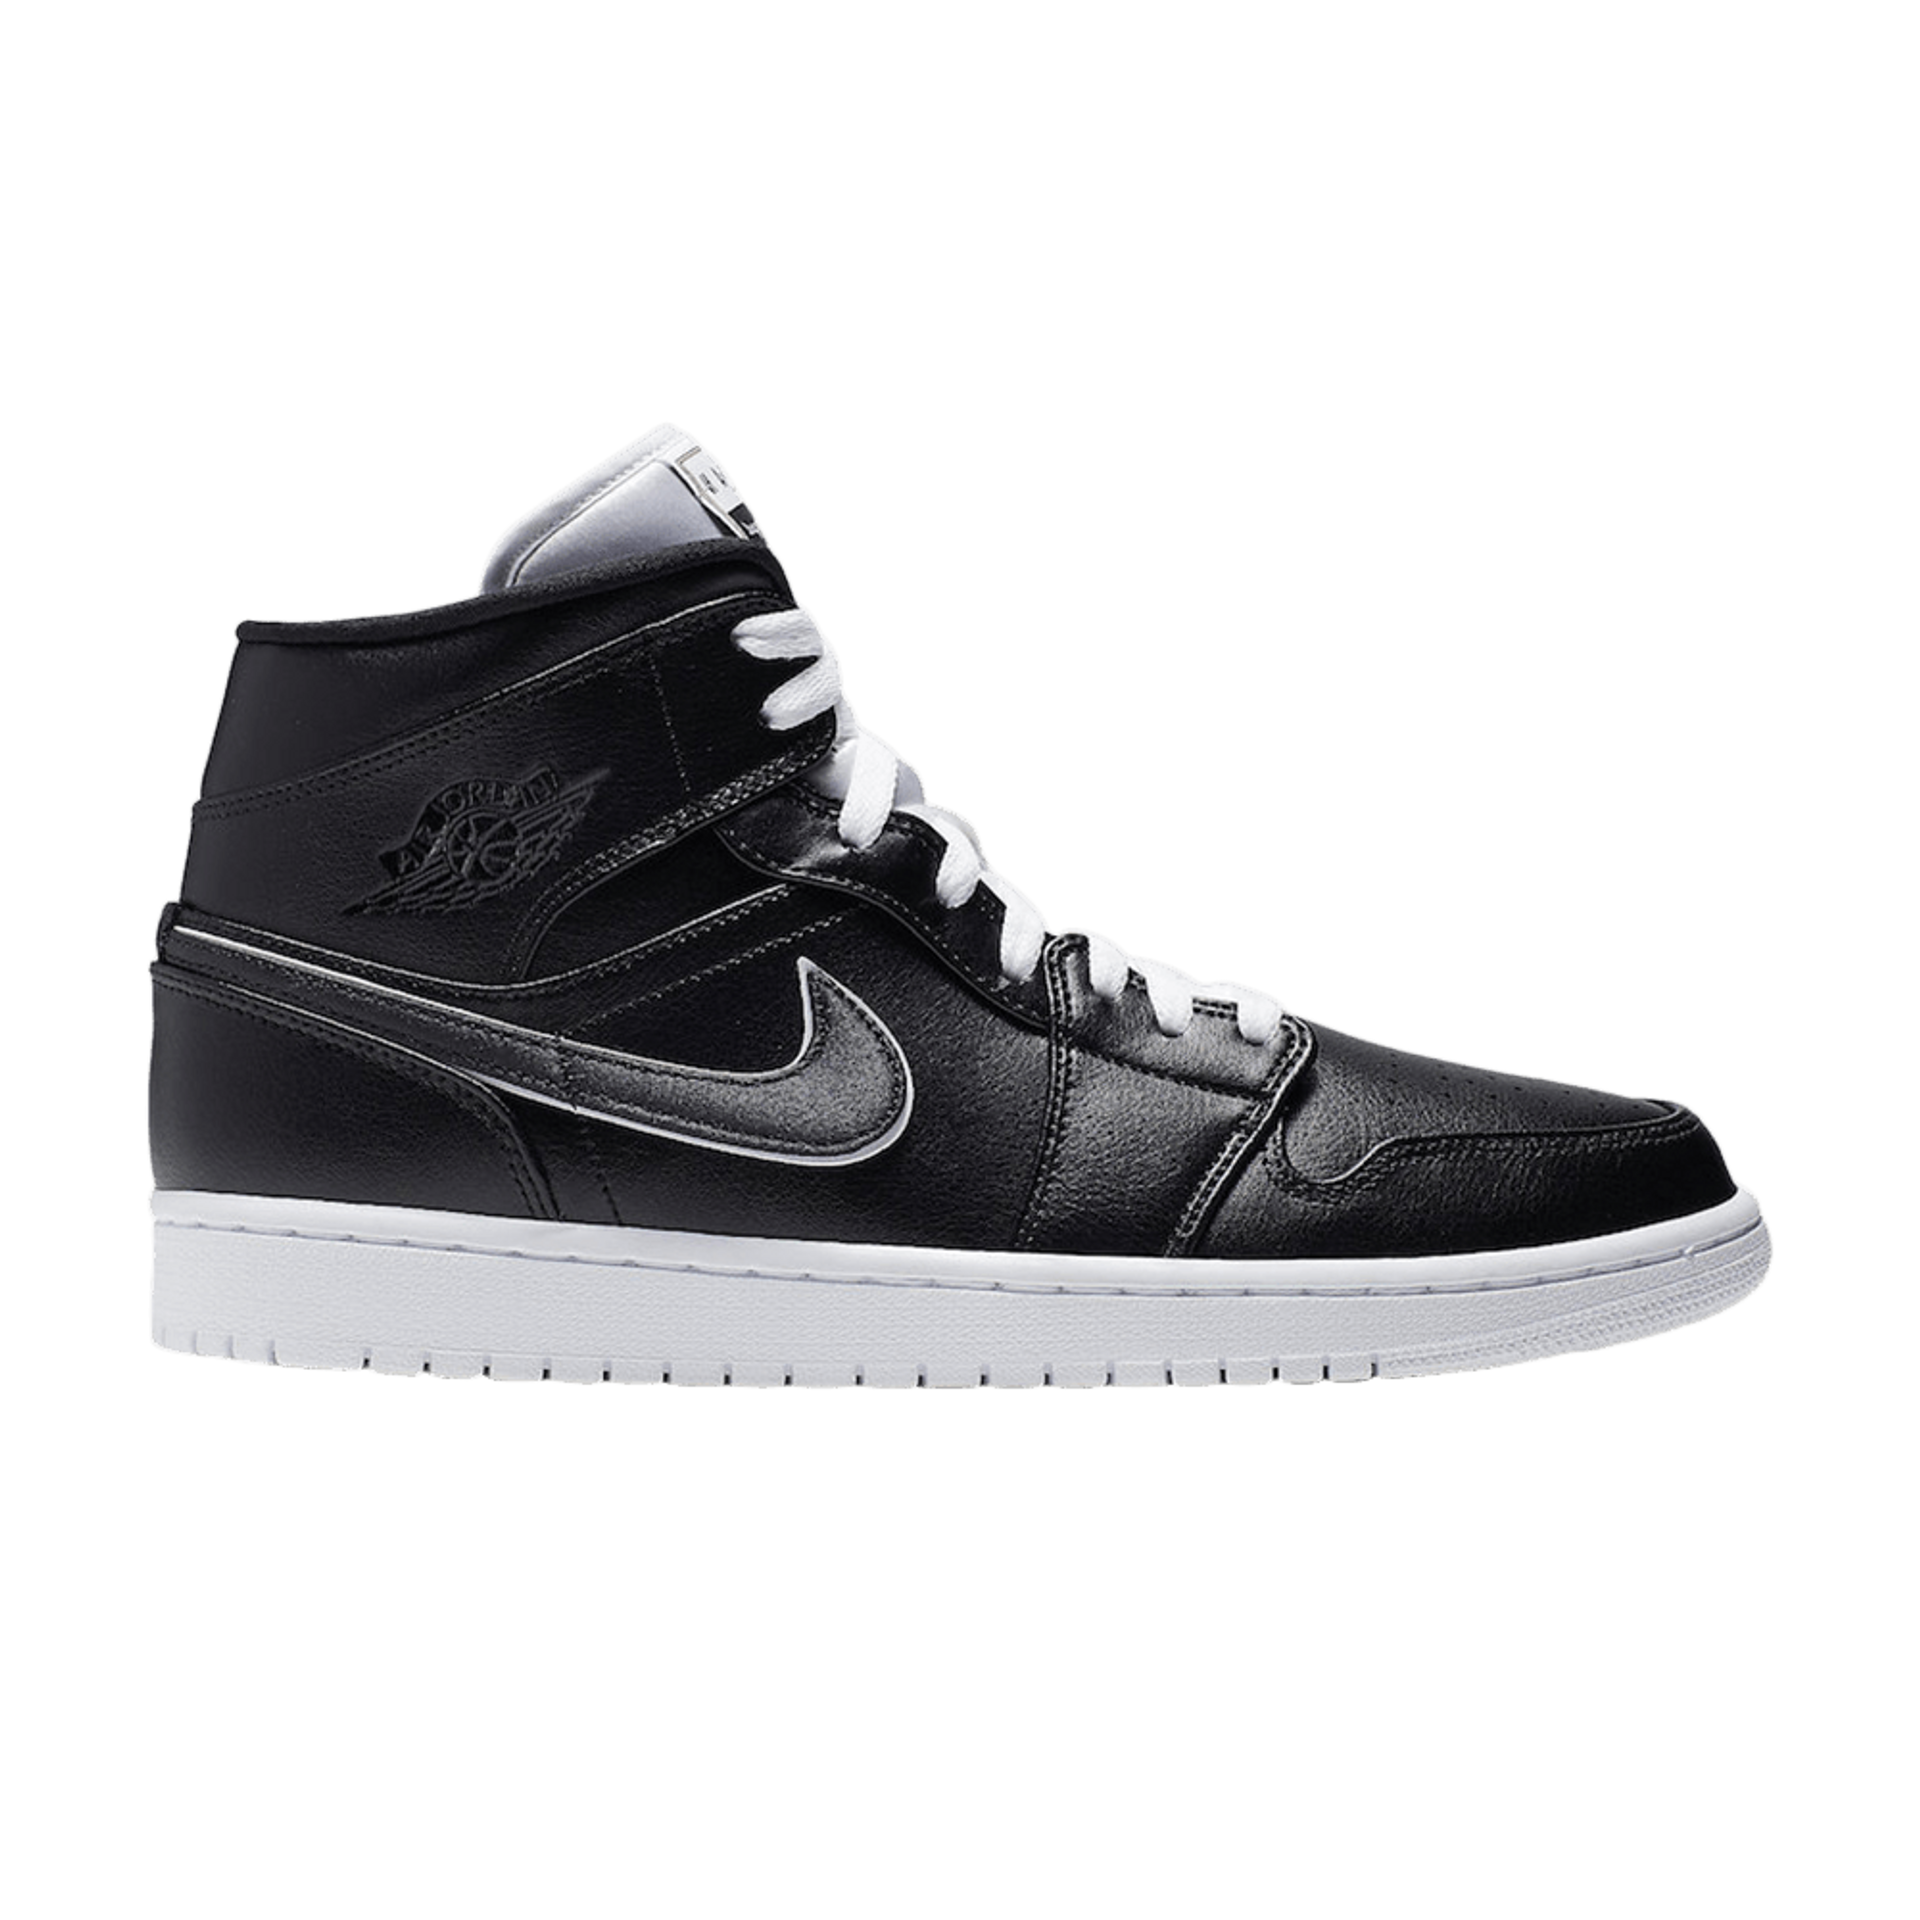 Air Jordan 1 Mid 'Maybe I Destroyed the Game' - 852542 016 | Ox Street